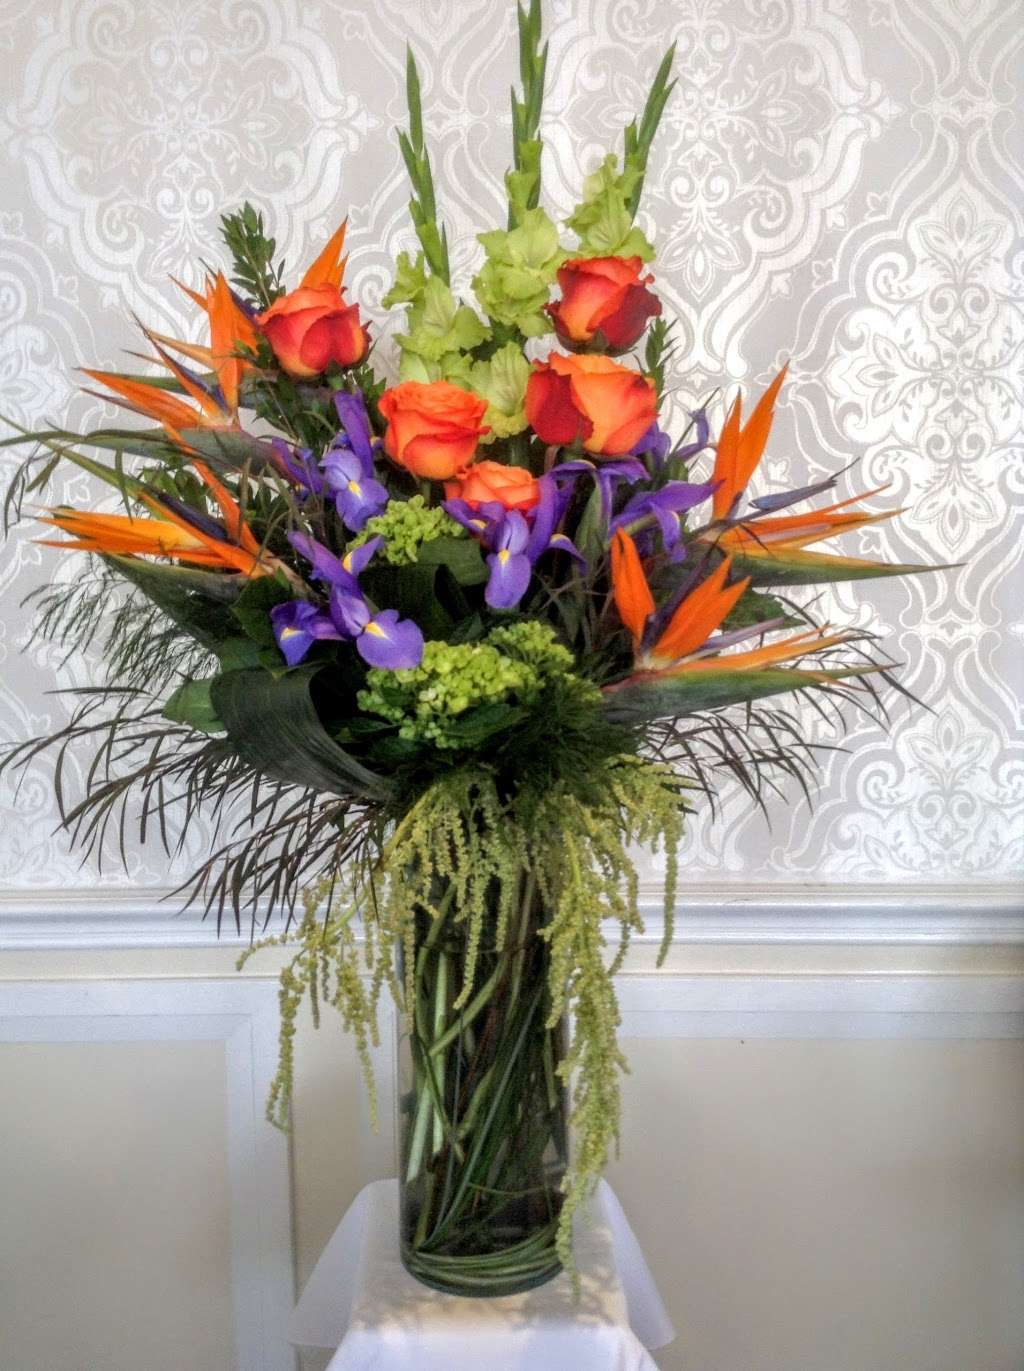 A Country Flower Shoppe and More | 420 State Hwy 34 S Suite 305 Next to the Colts Neck Post Office, Colts Neck, NJ 07722 | Phone: (732) 866-6669